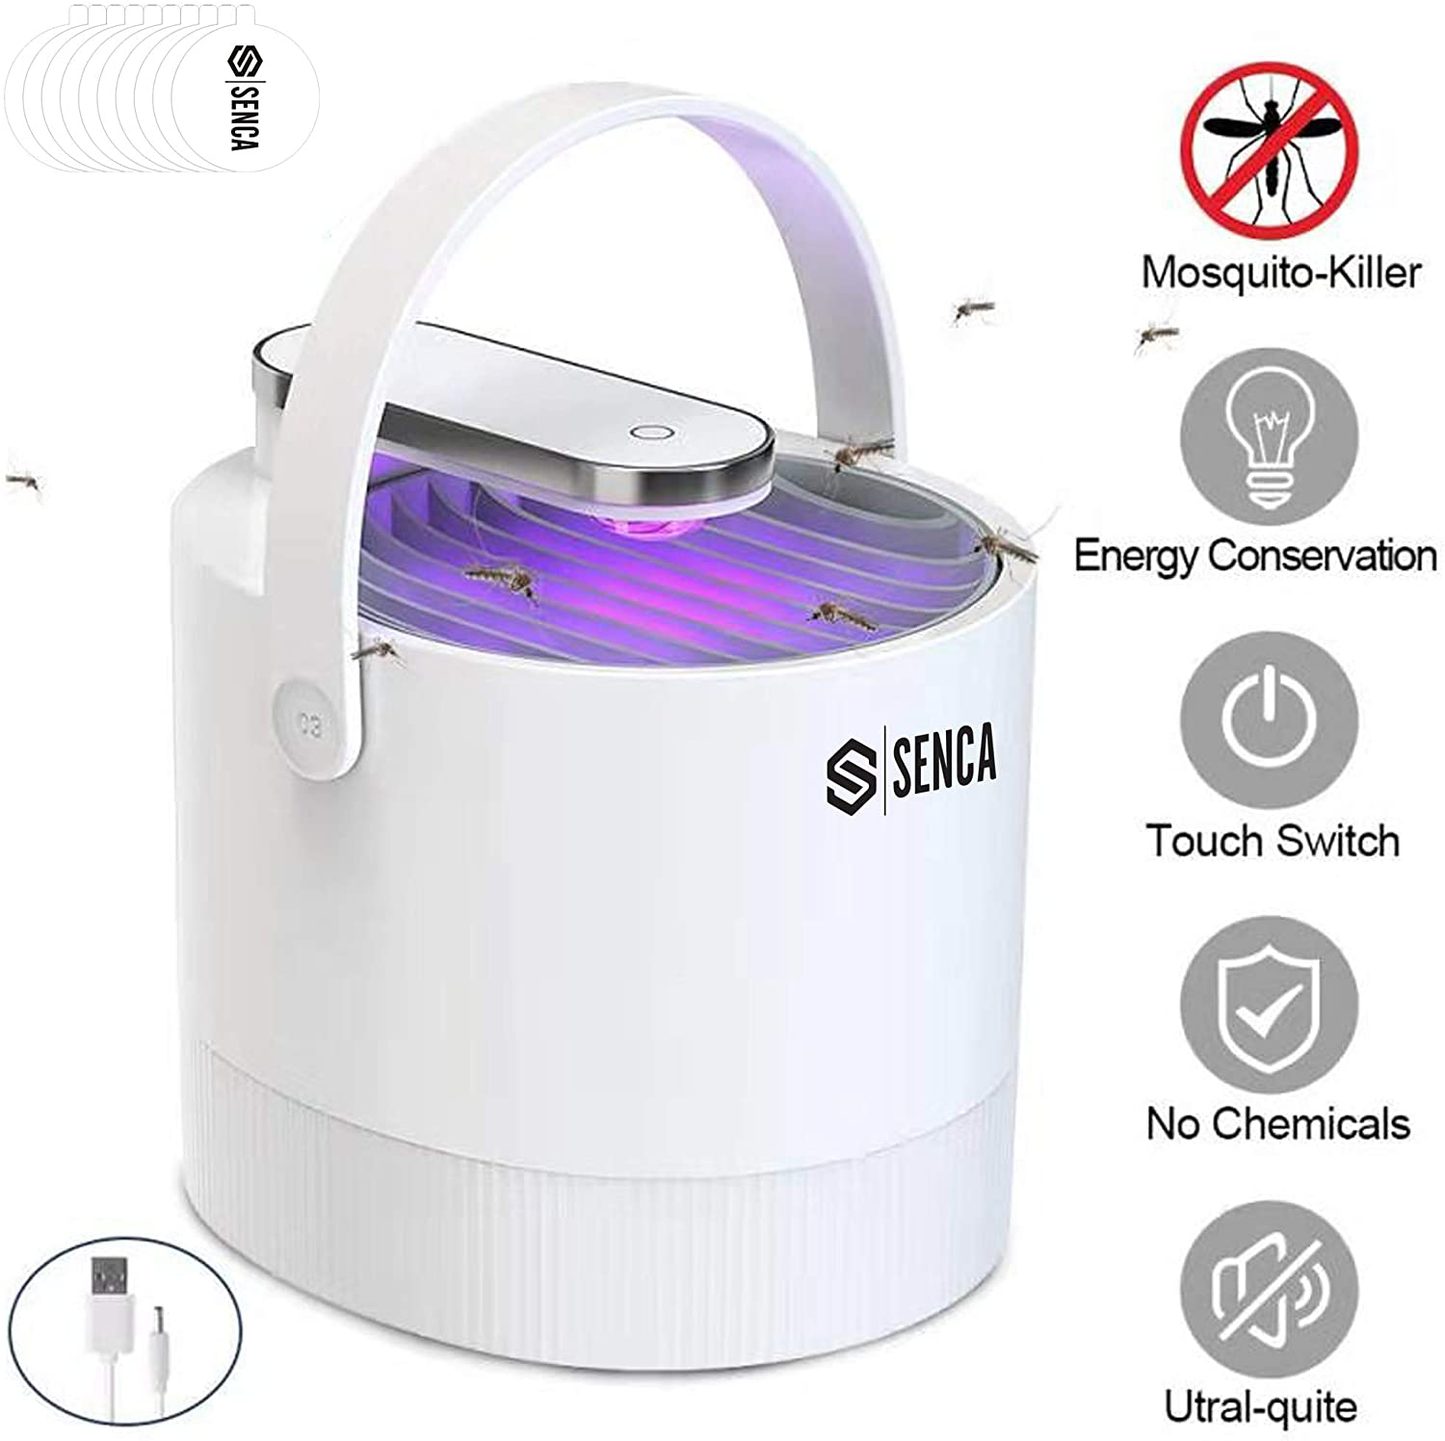 SENCA Indoor Outdoor Insect Trap, Bug, Fruit Fly, Gnat, Mosquito Killer Lamp, USB Plug-in with Adapter and 10 Sticky Glue Board, Suction Fan, No Zapper, Child Safe (White)